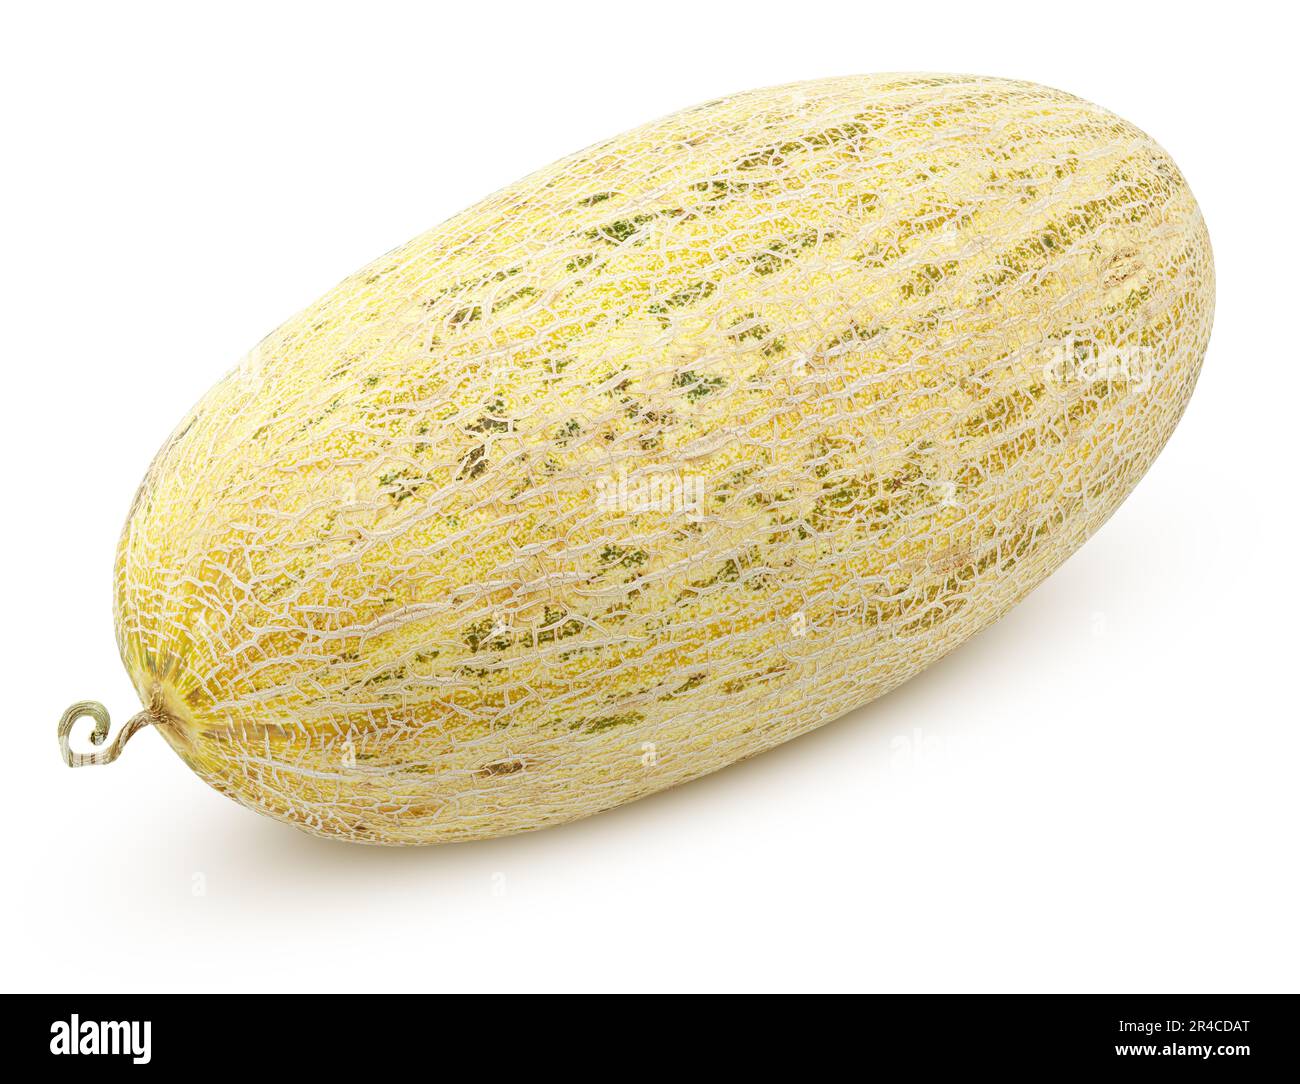 Long oval melon isolated on white background. Uzbek Russian melon with clipping path. Full depth of field. Stock Photo